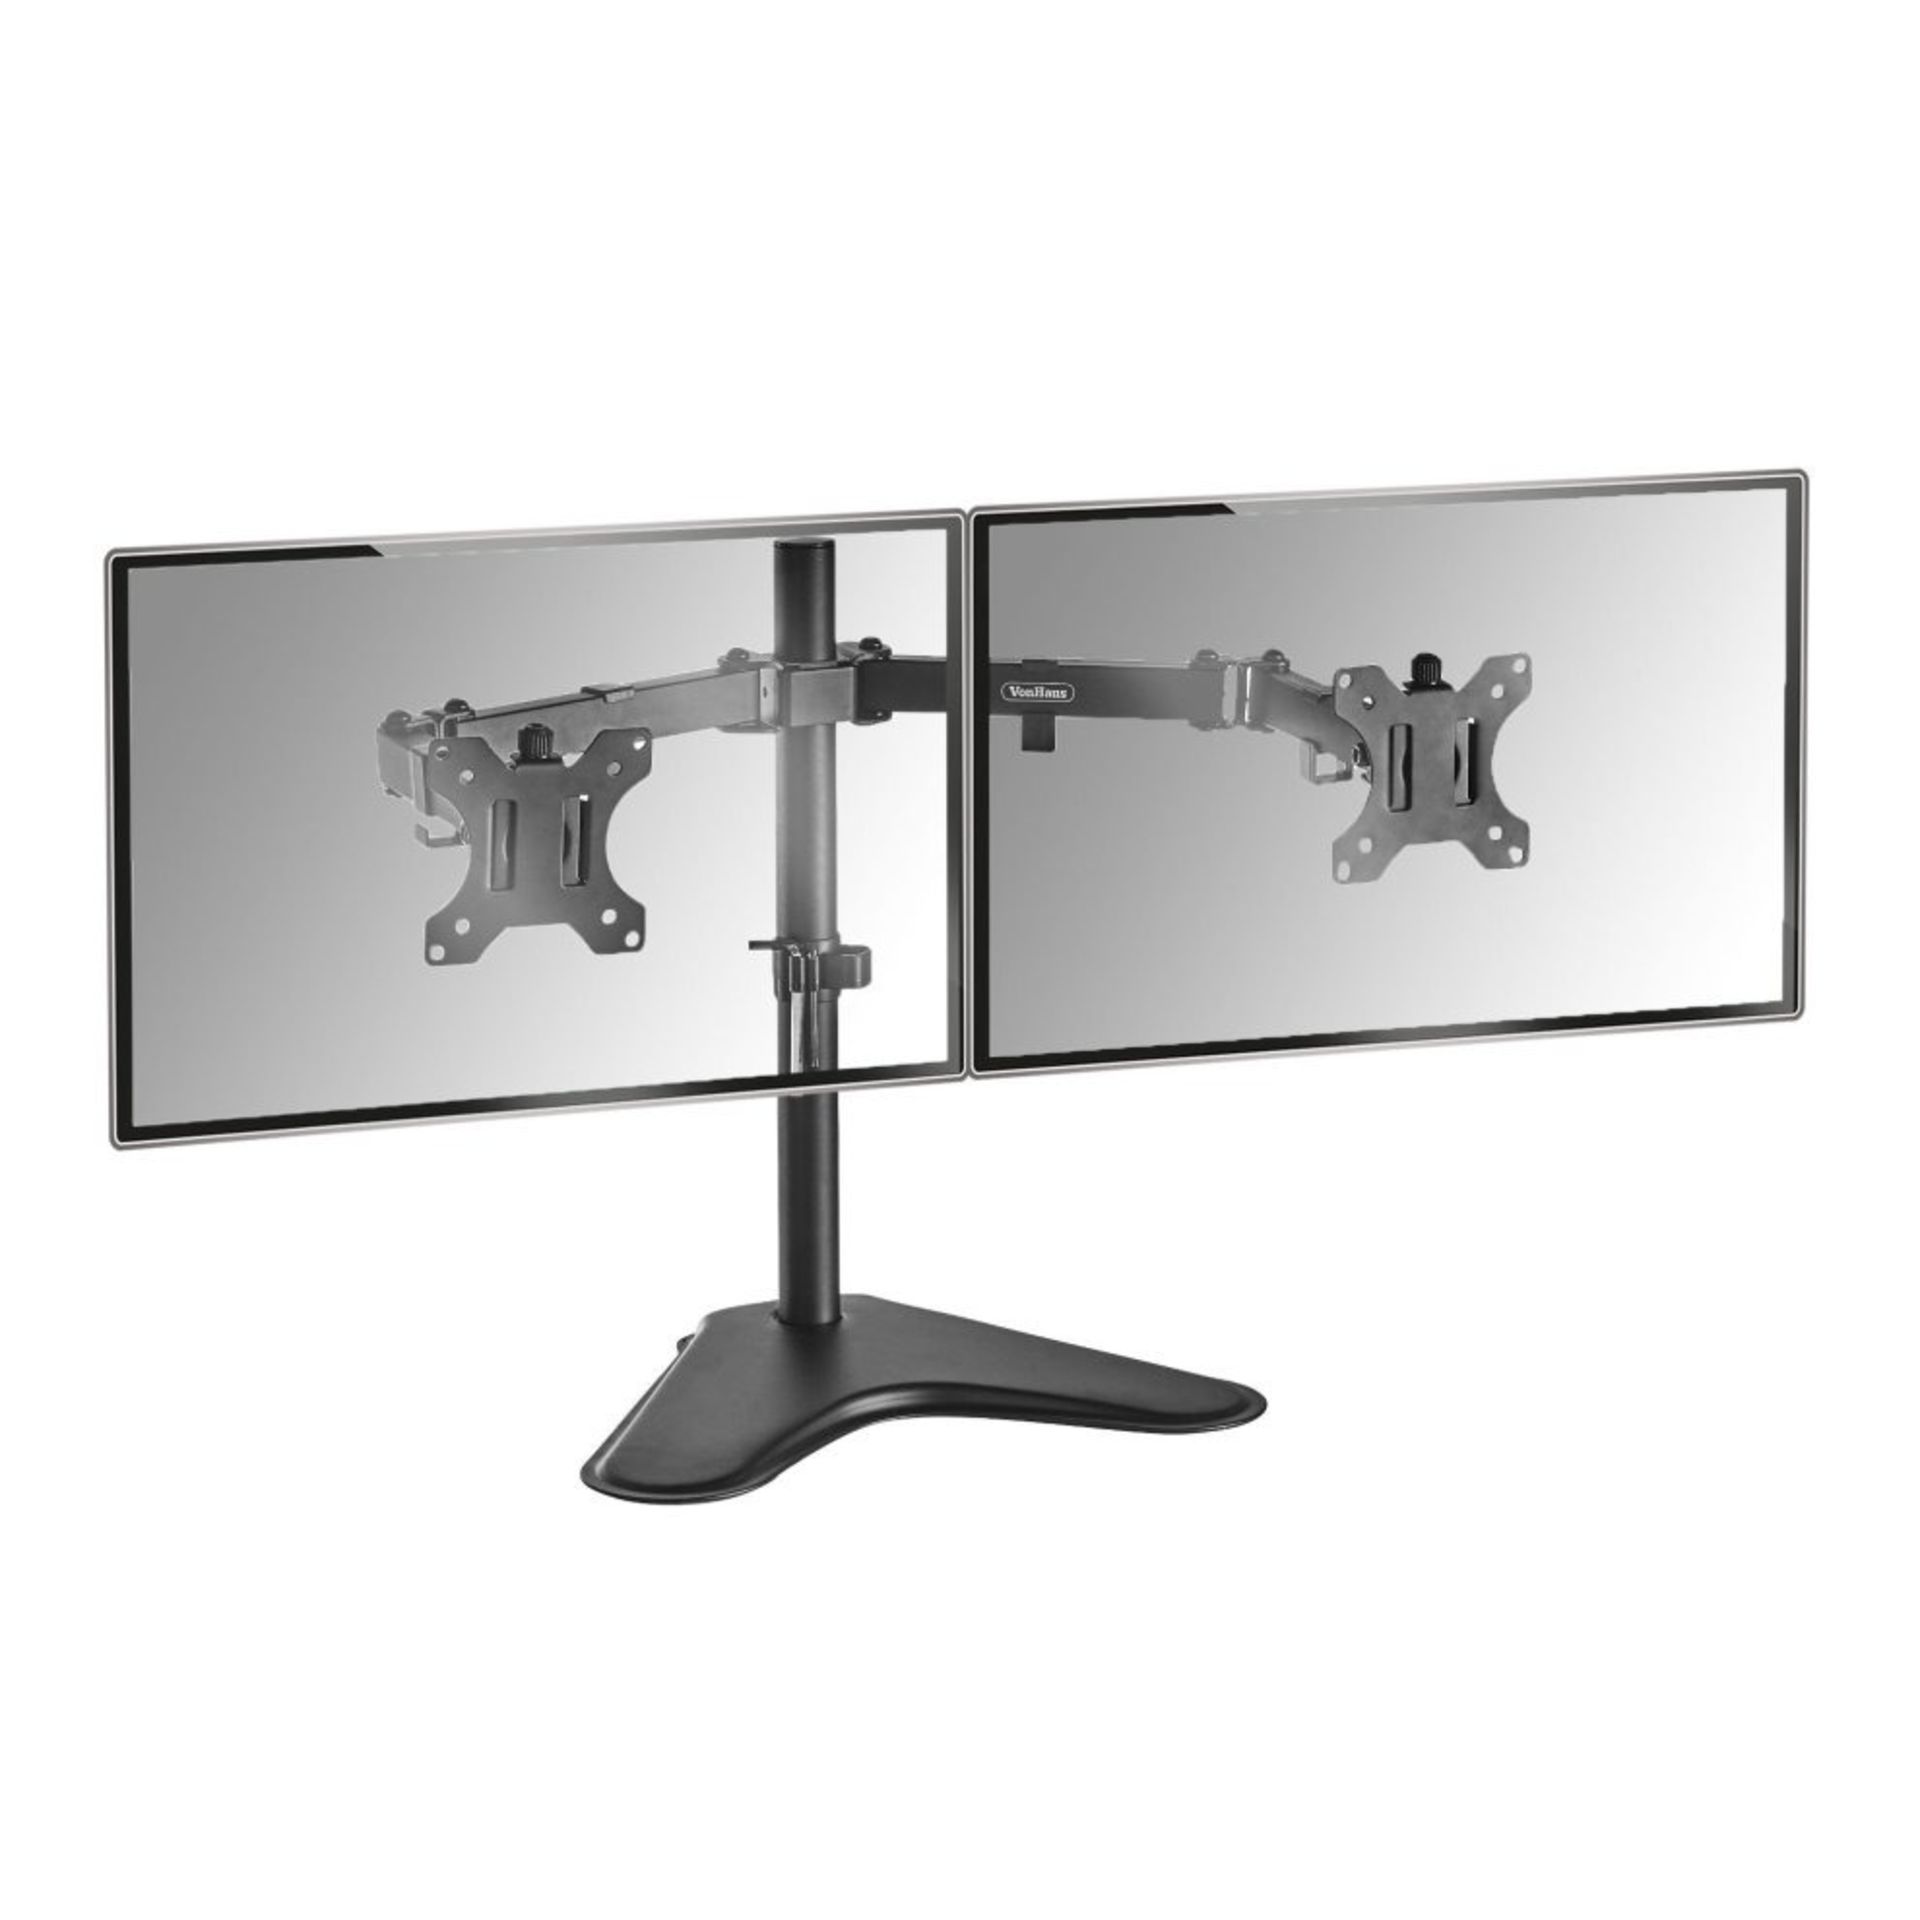 Dual Arm Desk Mount with Stand - ER33